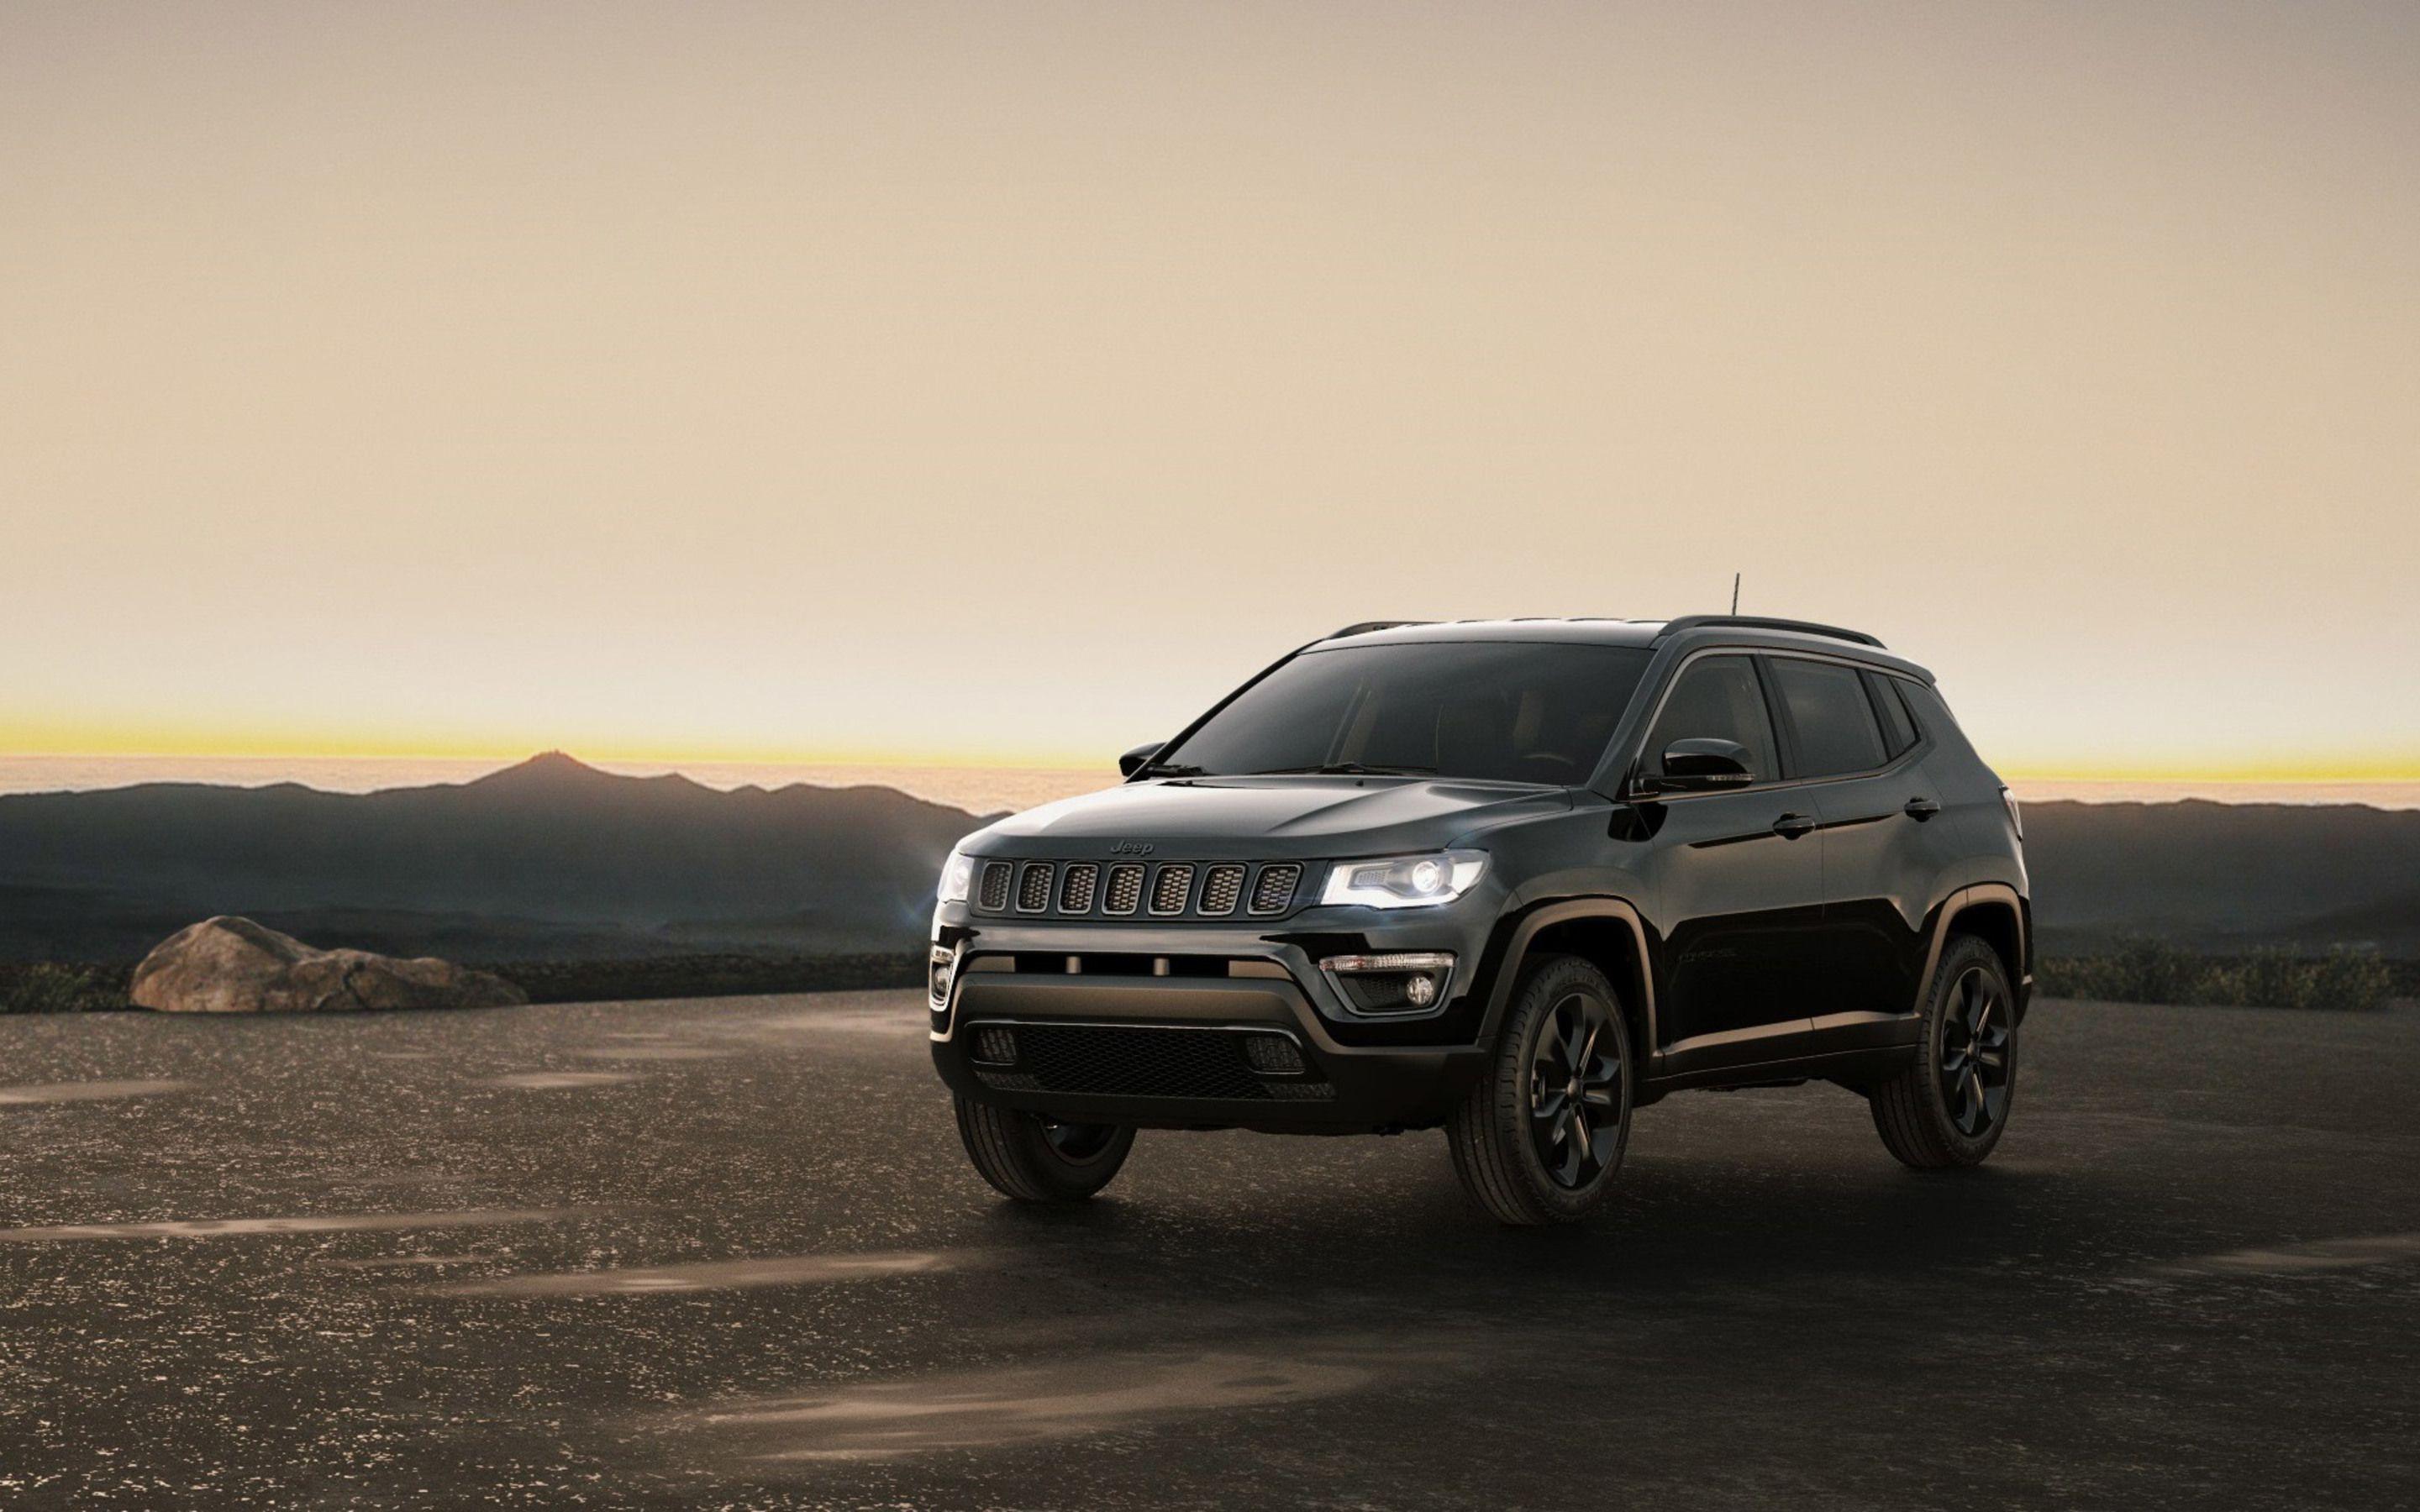 Jeep Compass Wallpapers Top Free Jeep Compass Backgrounds Wallpaperaccess